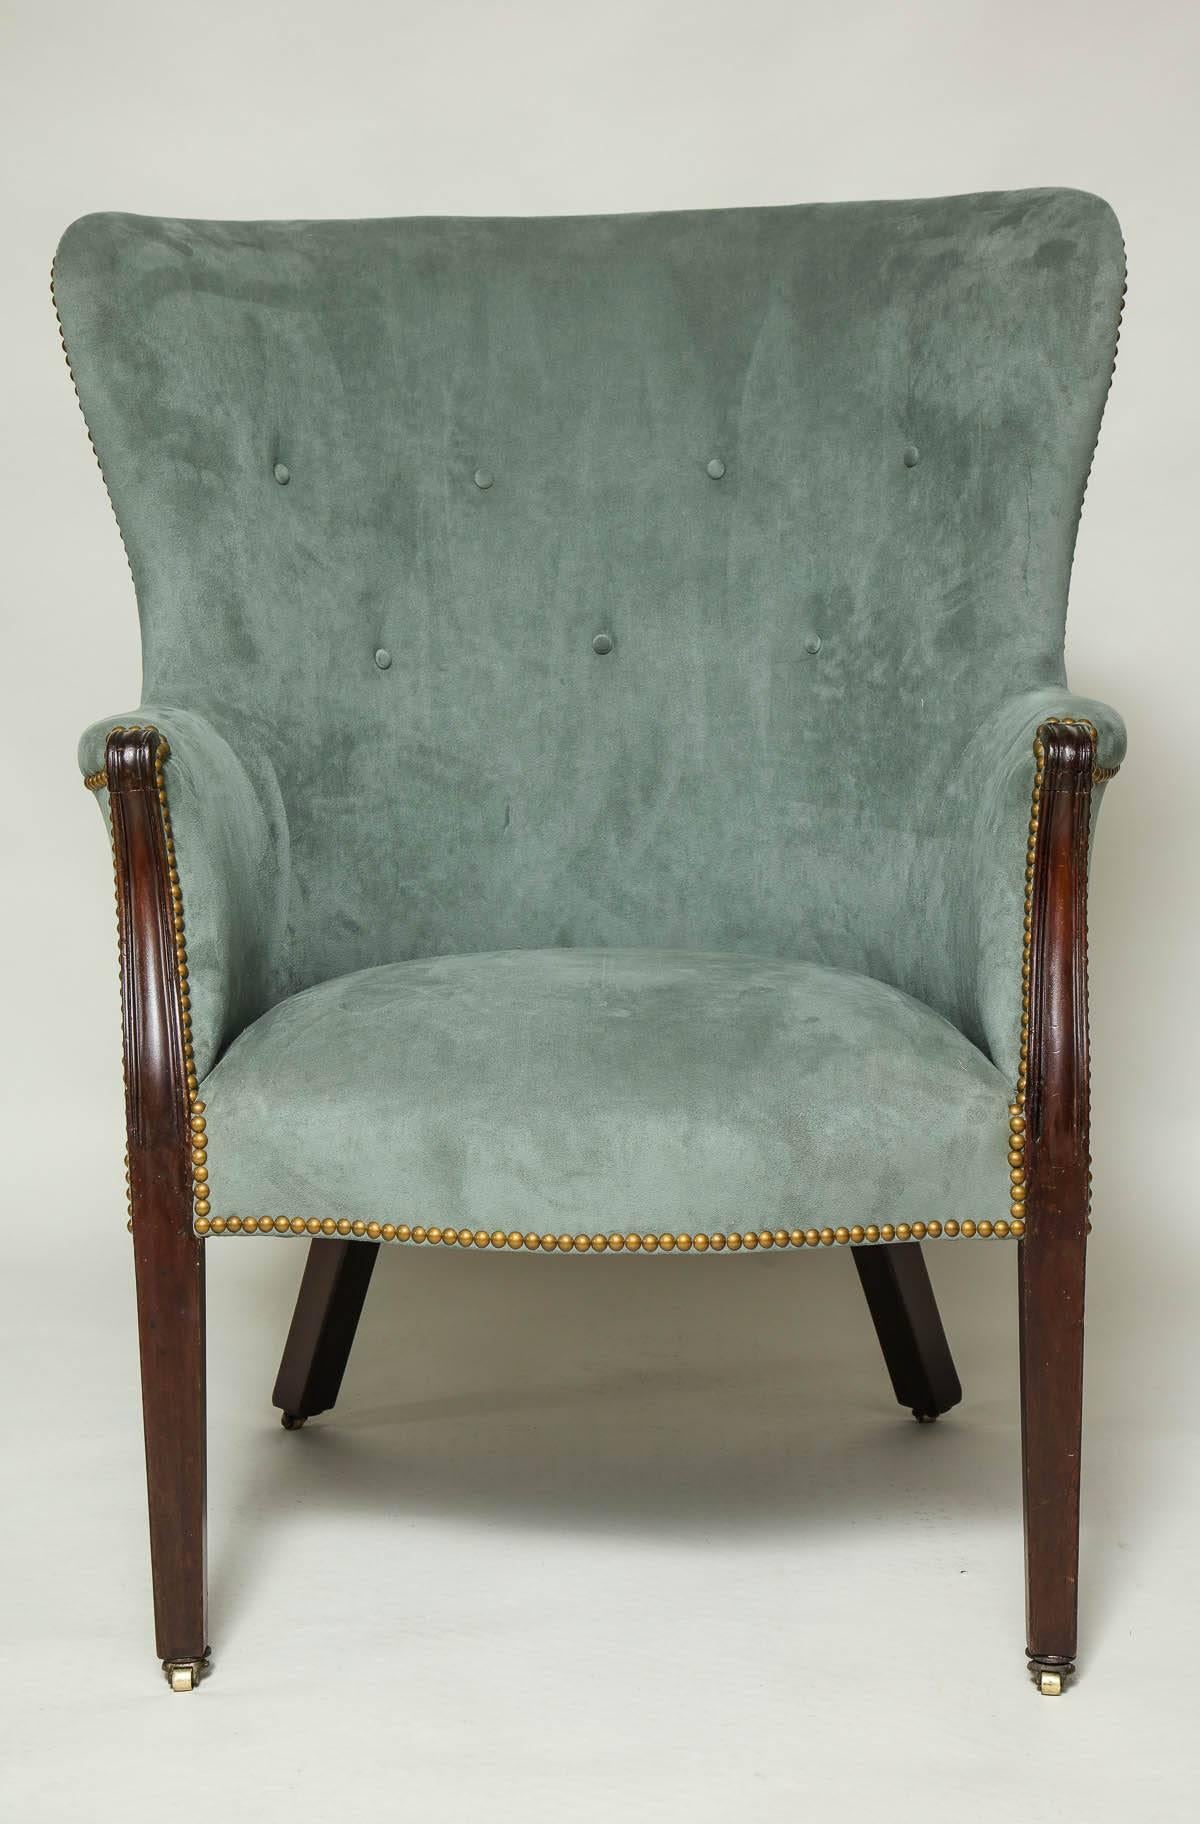 Fine 18th century George III mahogany wing chair with a barrel back. Arms with scroll carving, standing on square tapered and molded legs ending in original narrow brass casters. Newly upholstered in ultrasuede with close nailhead decoration,